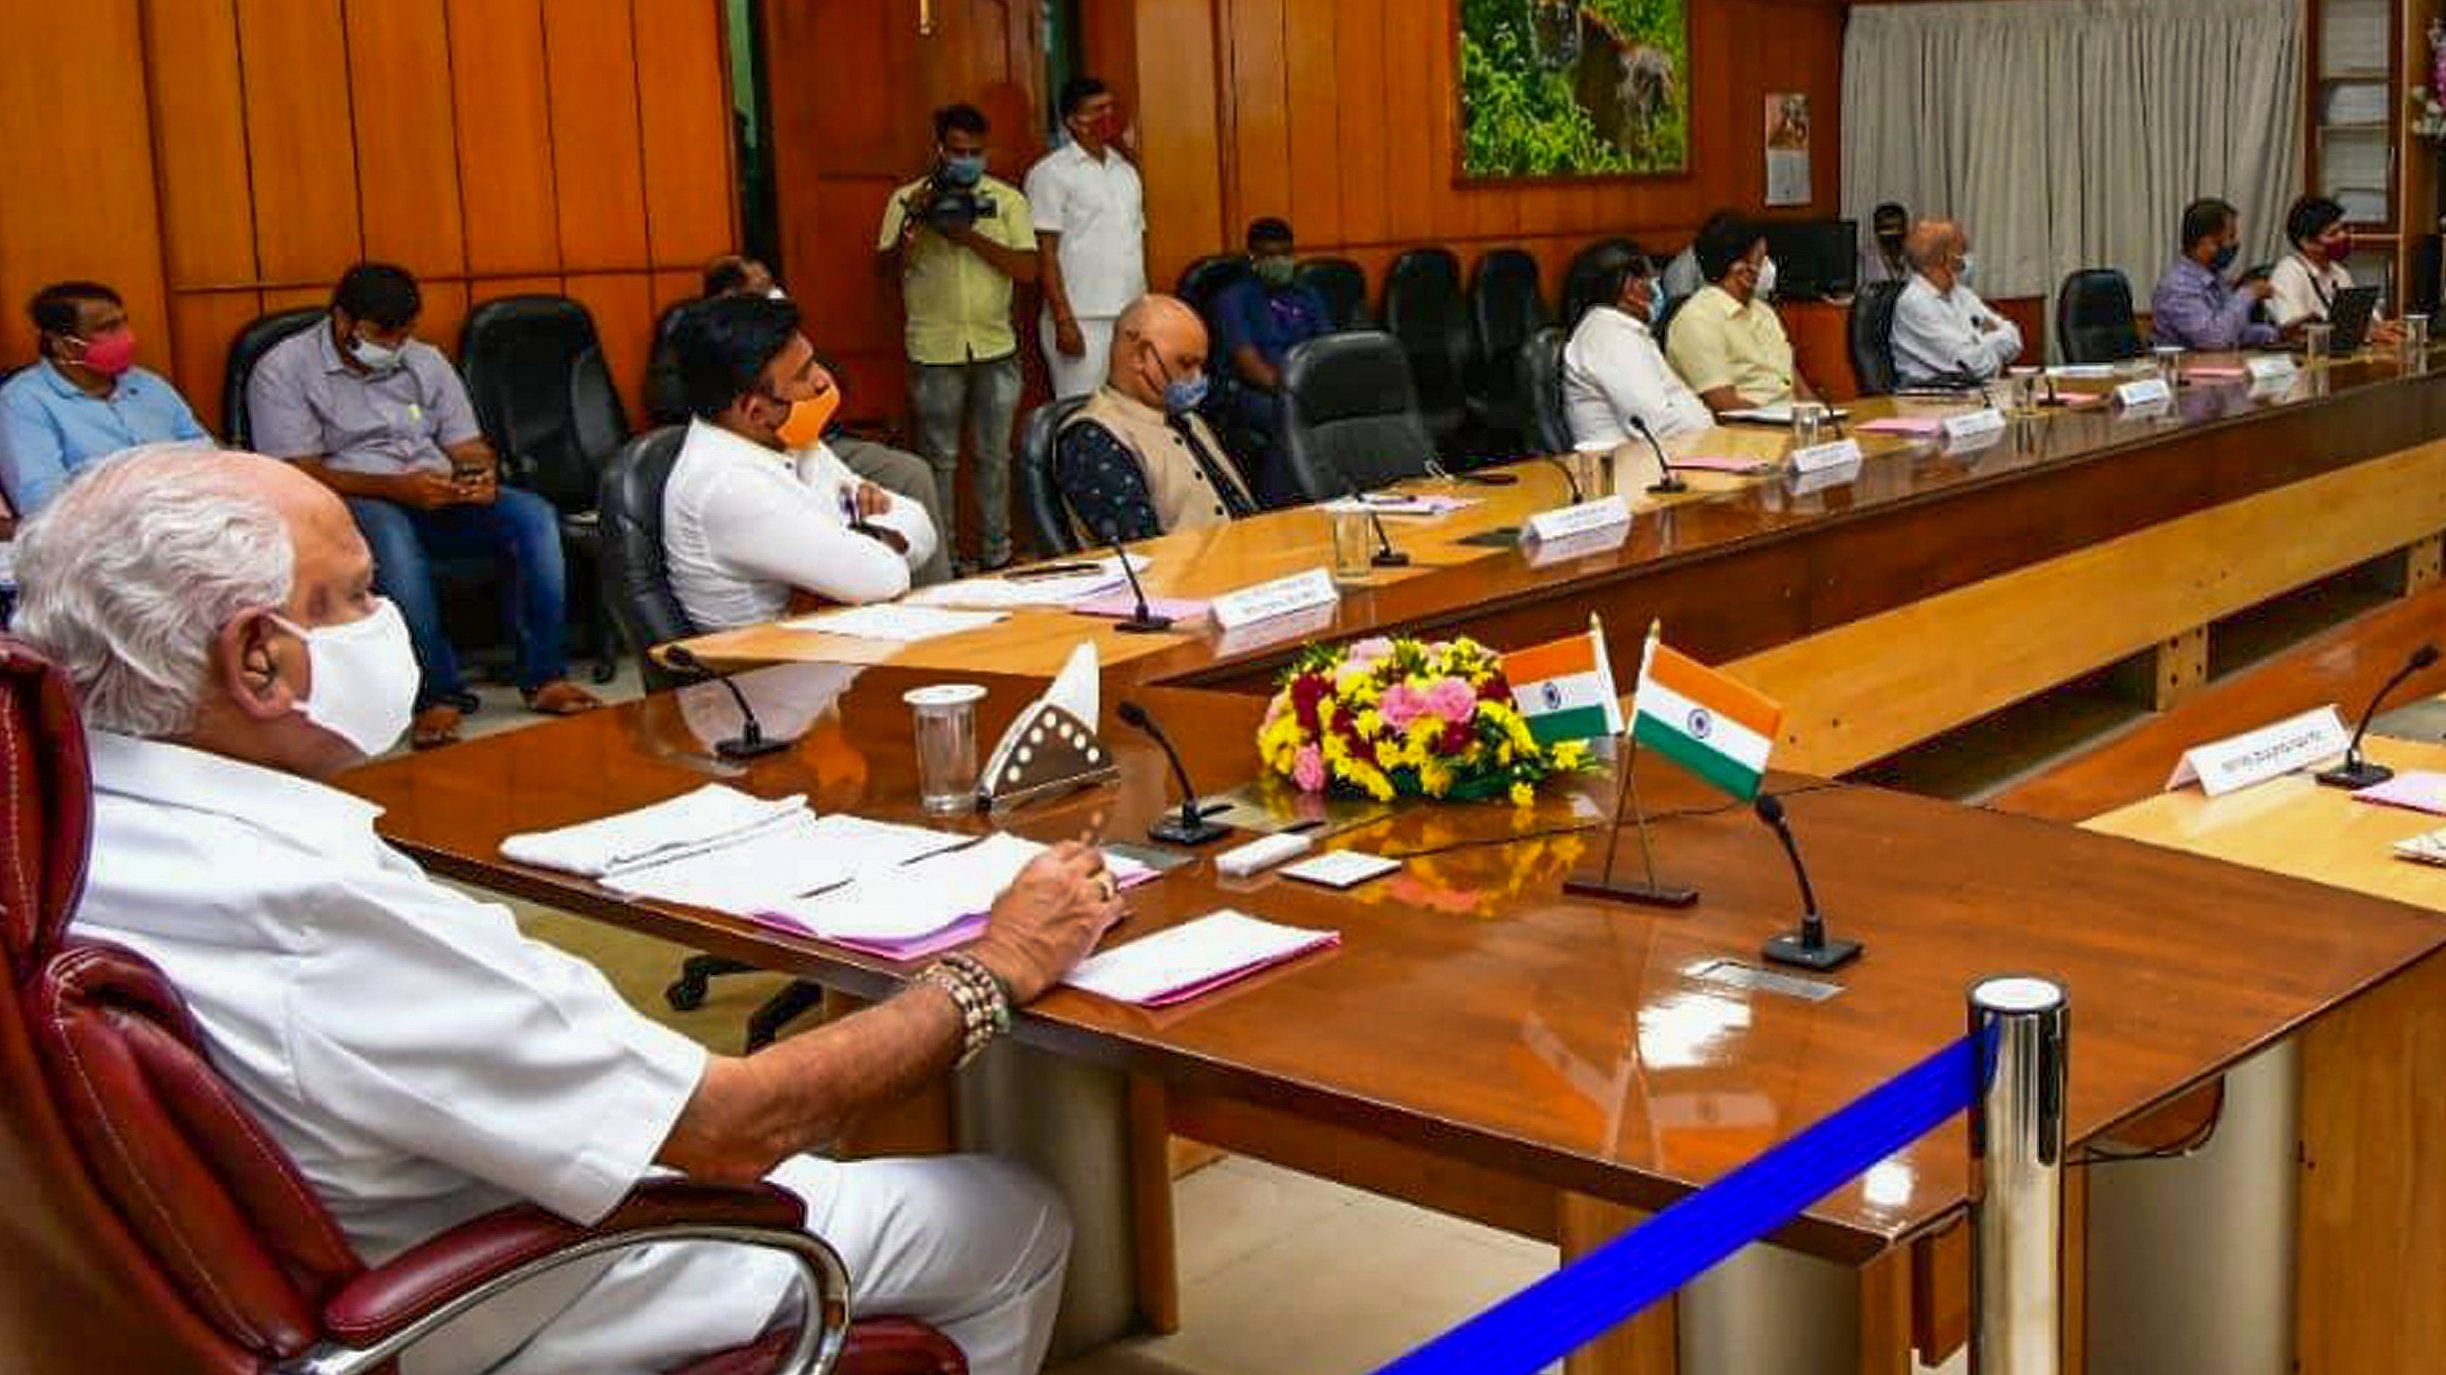 B S Yediyurappa participating with in a video conference on Covid 19 situation with PM, other states. Credit: DH File Photo